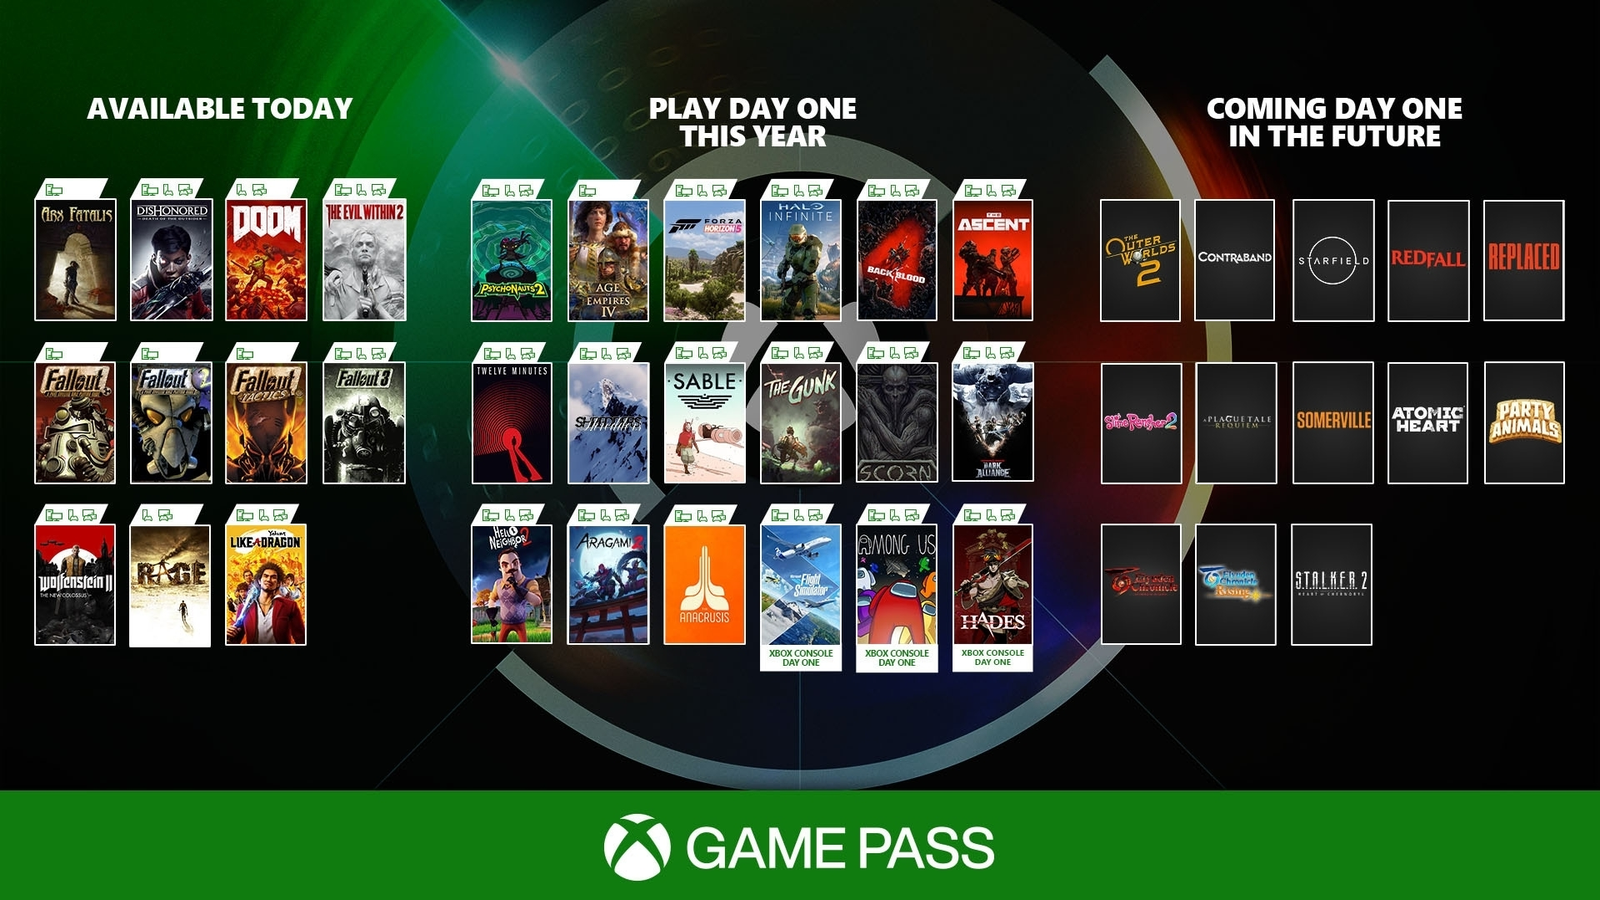 Microsofts Impressive List Of Xbox Game Pass Games Just Got Even Better 1623611169053 ?width=1600&height=900&fit=crop&quality=100&format=png&enable=upscale&auto=webp